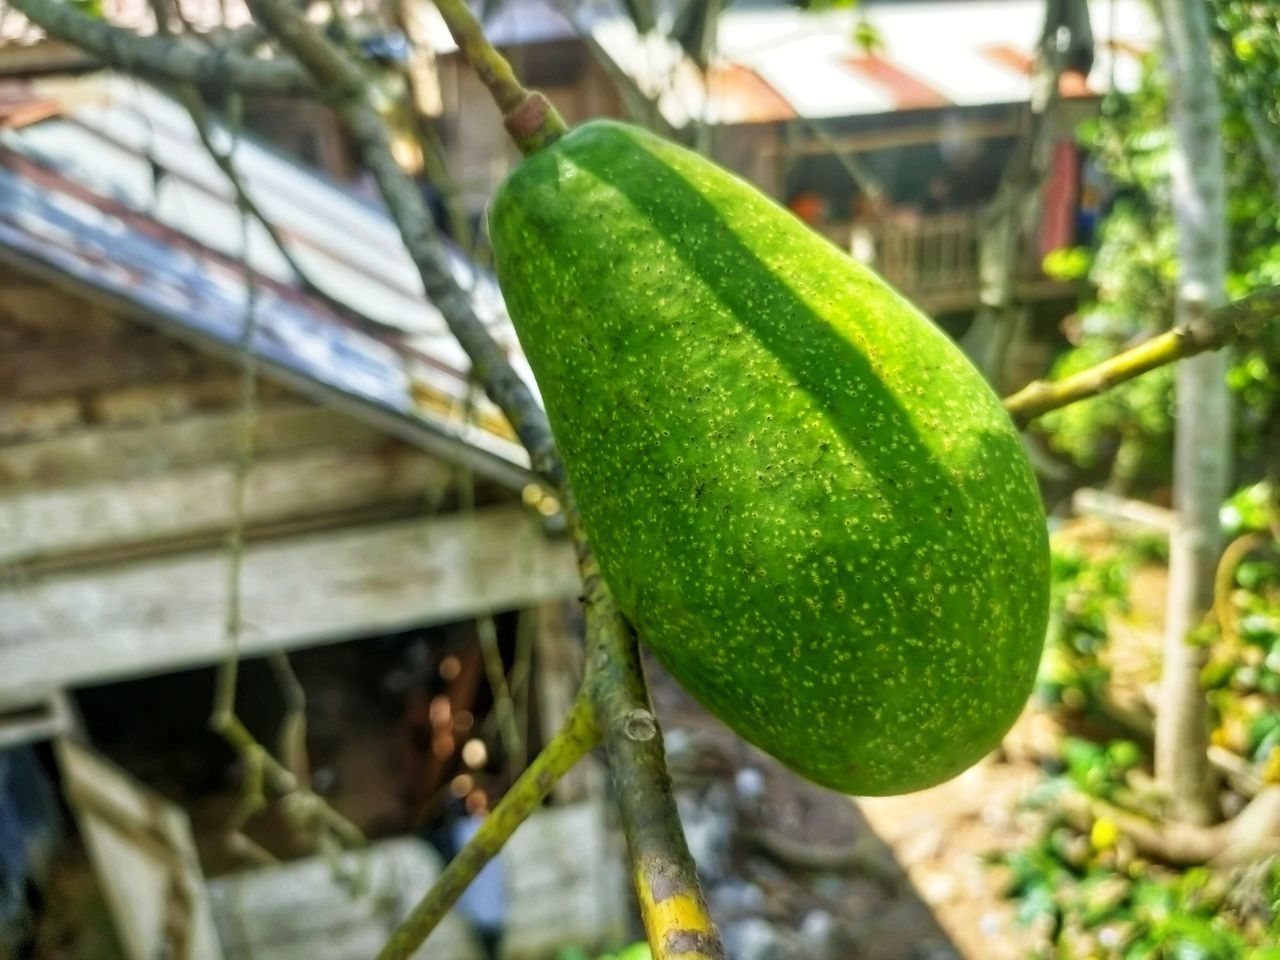 CLOSE-UP OF FRUIT GROWING IN FARM